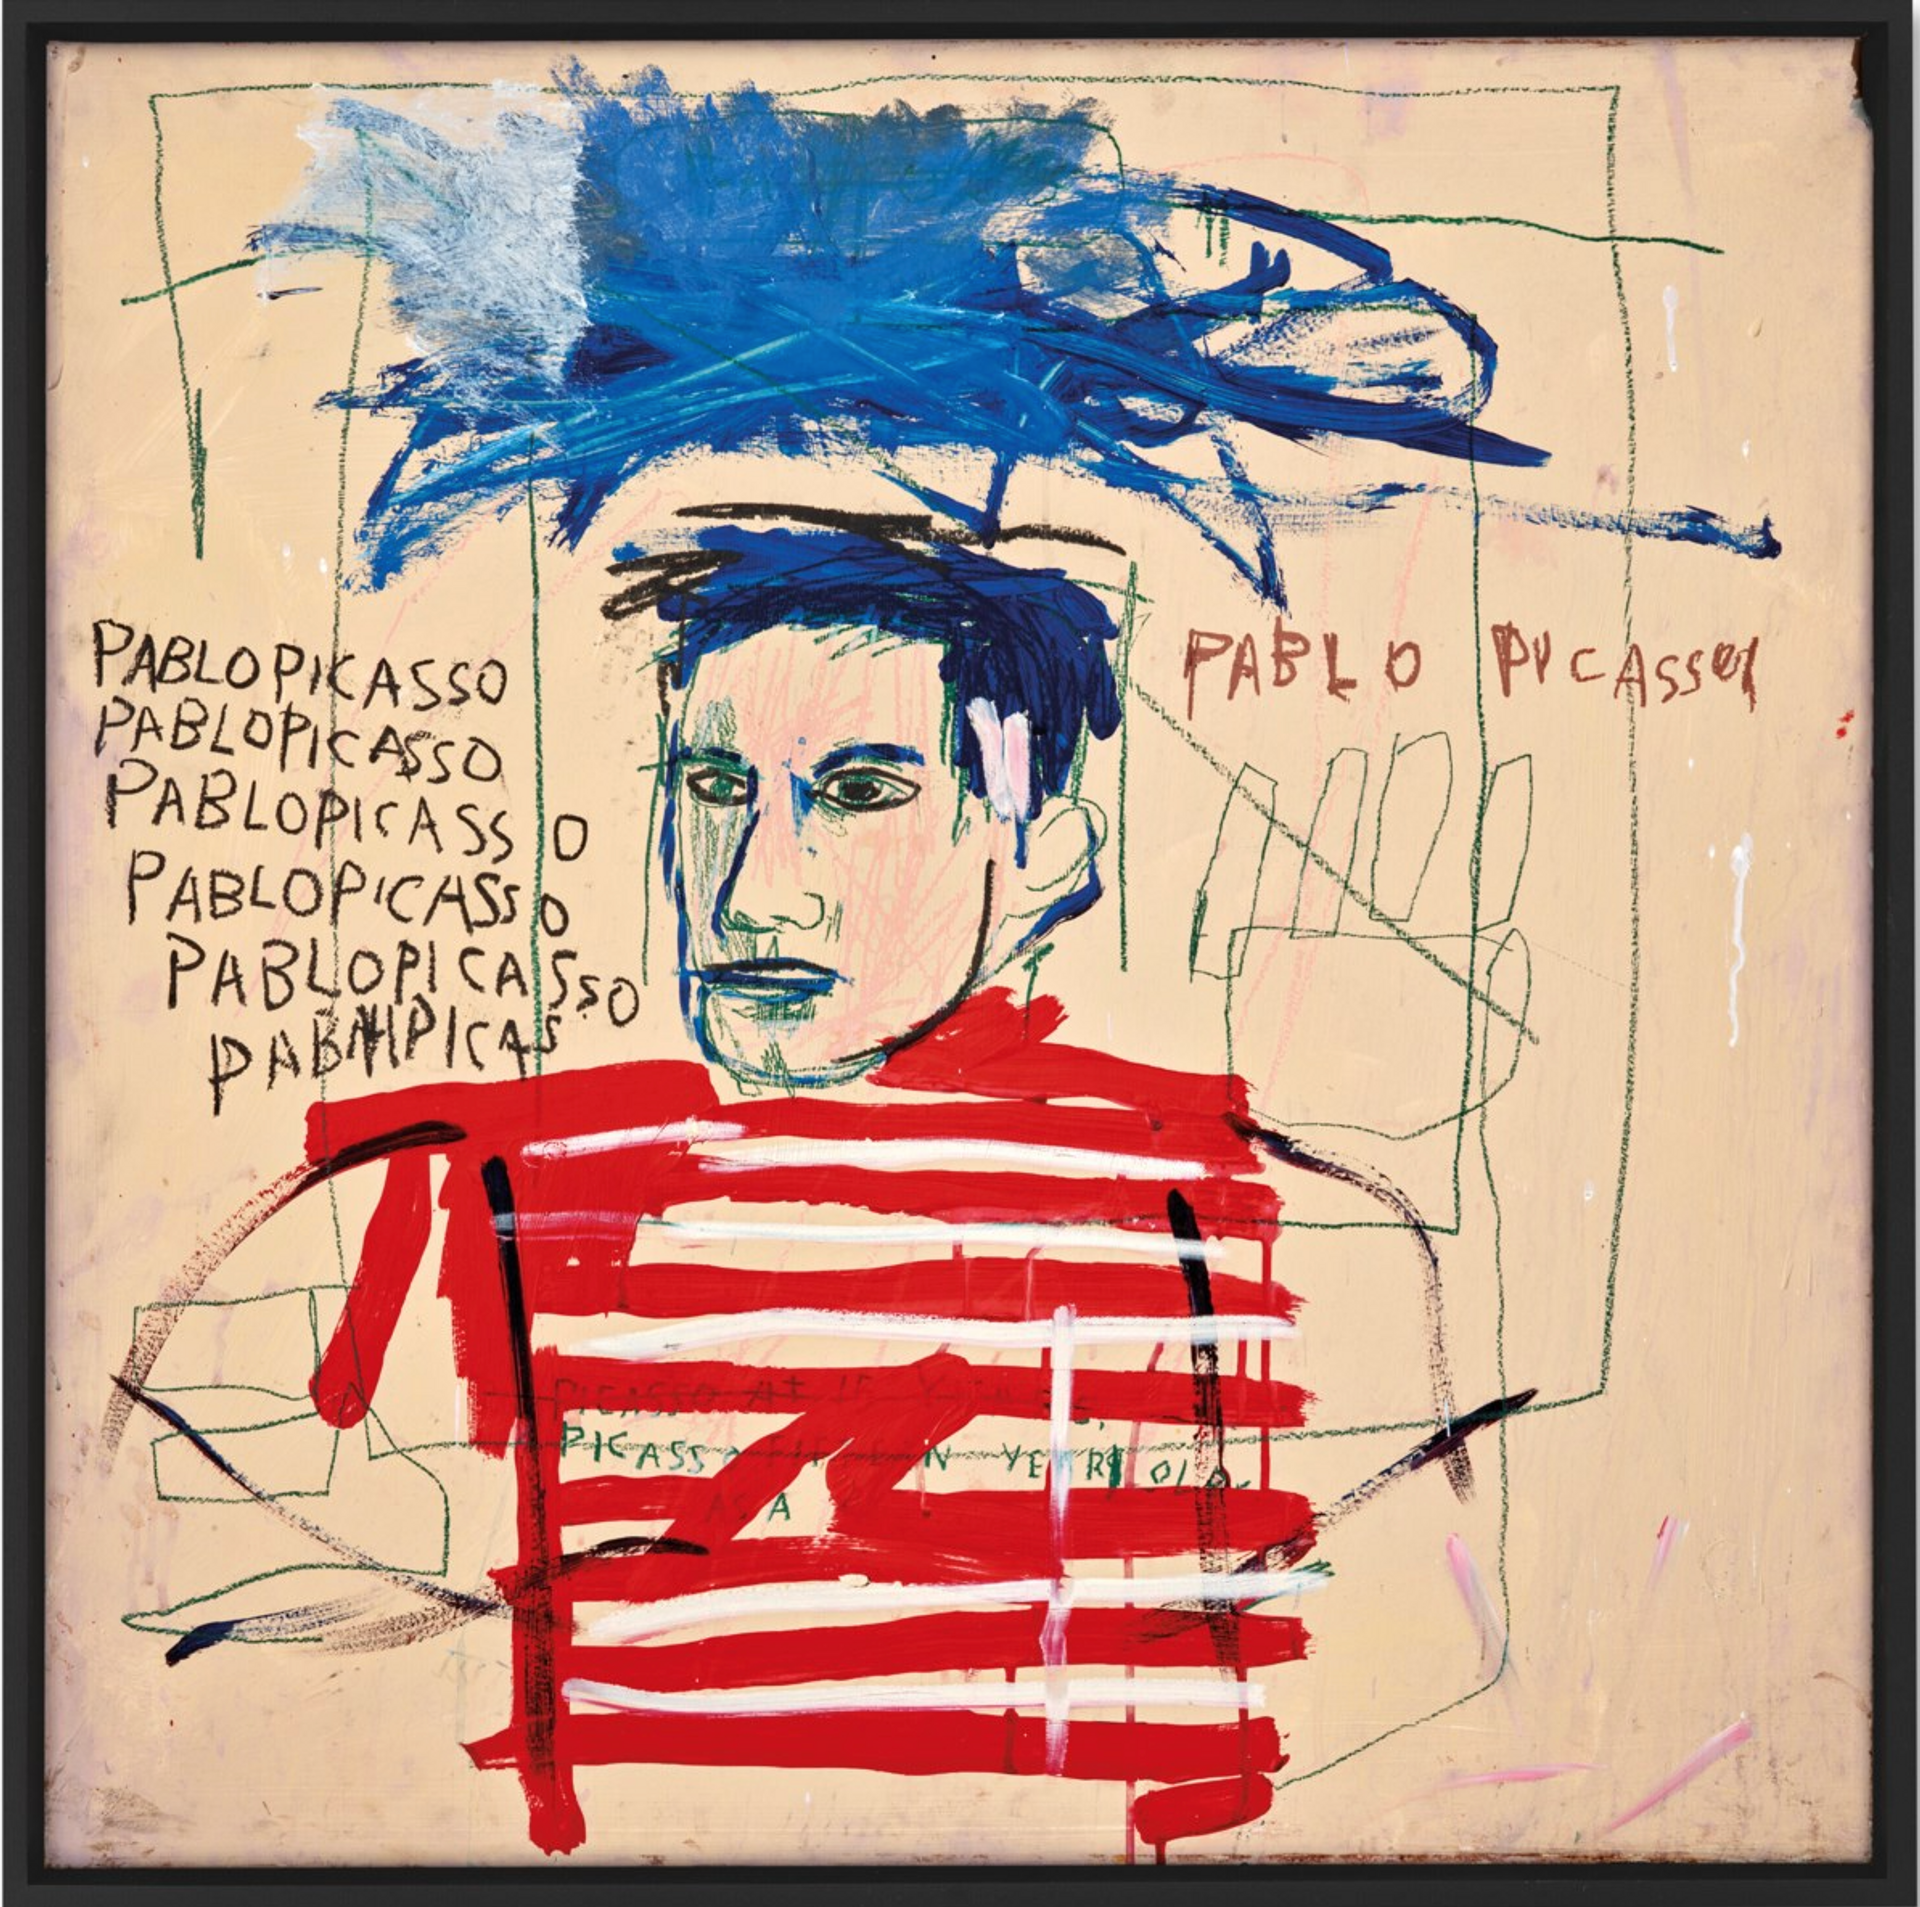 Young and Old Picasso: The Spanish Artist’s Influence on Jean-Michel Basquiat